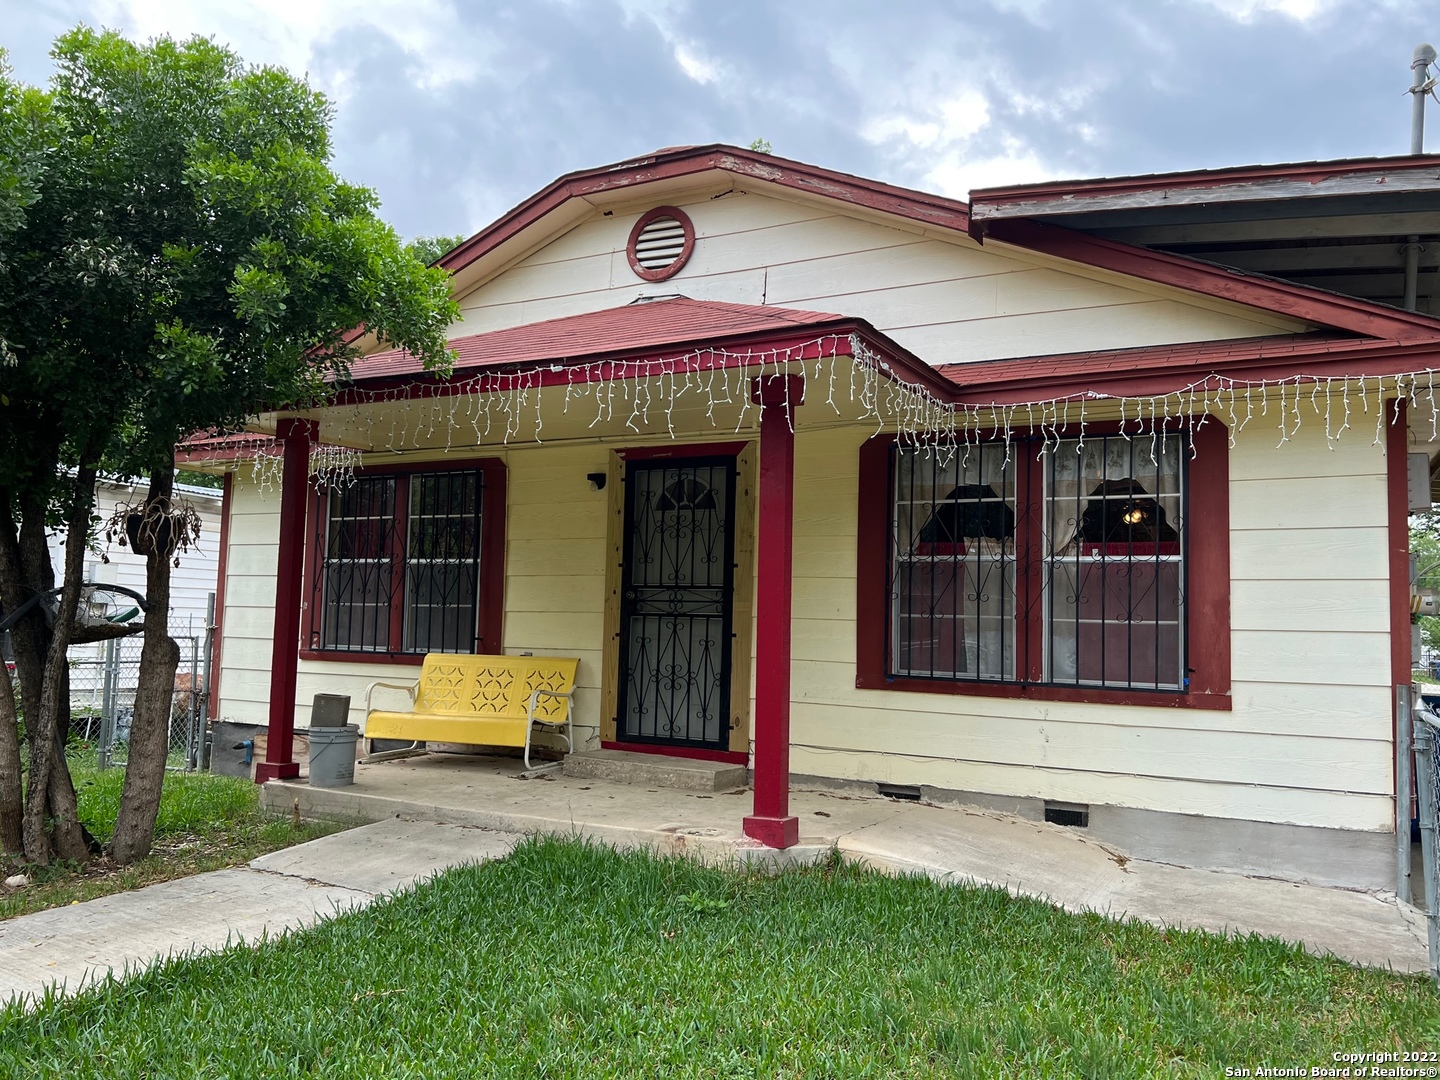 Great Investor friendly property. Welcome to this wonderful 3 bedroom, 2 bath home with lots of great potential. It has an extremely long driveway with storage space in the back of the property. PROPERTY IS BEING SOLD AS-IS. NO REPAIRS WILL BE MADE BY THE SELLER.